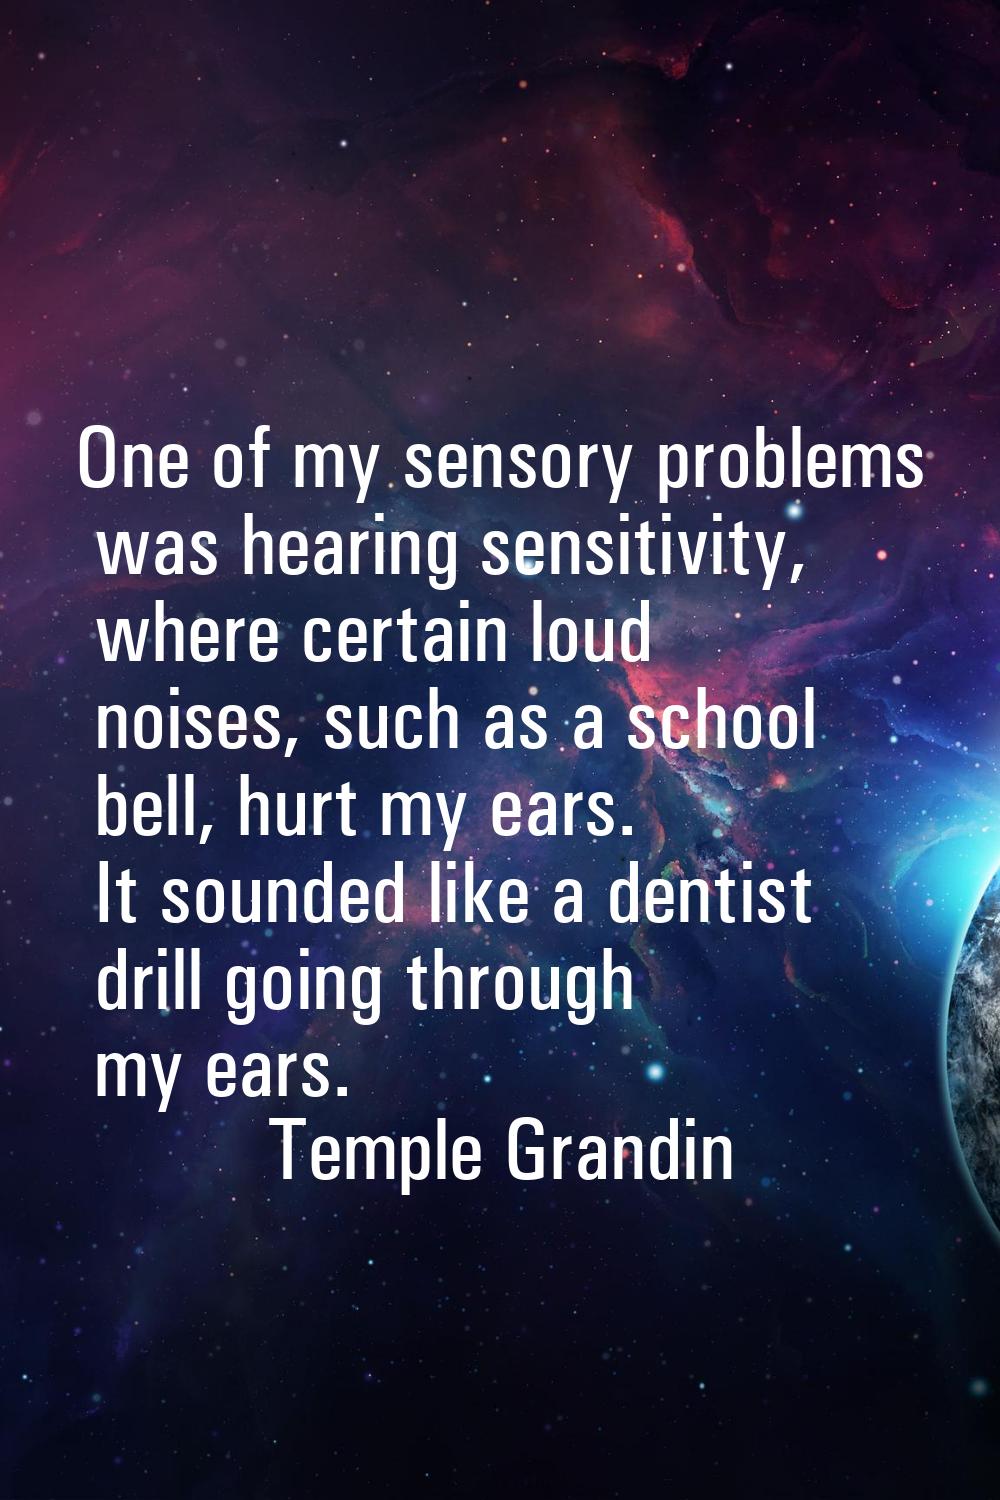 One of my sensory problems was hearing sensitivity, where certain loud noises, such as a school bel